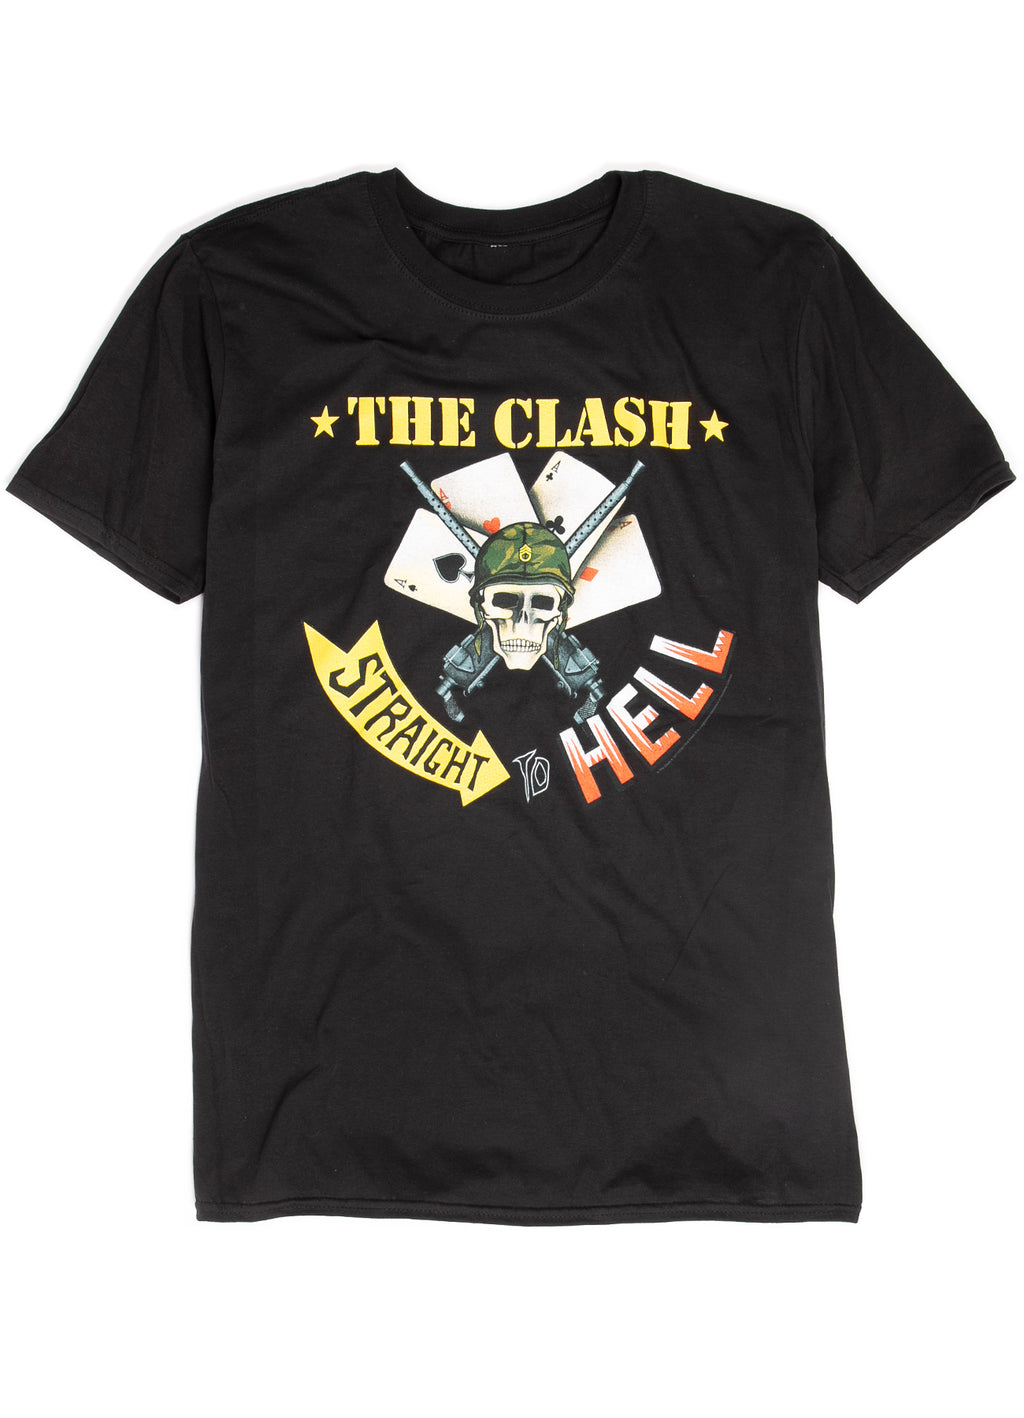 The Clash "Straight to Hell" t-shirt.